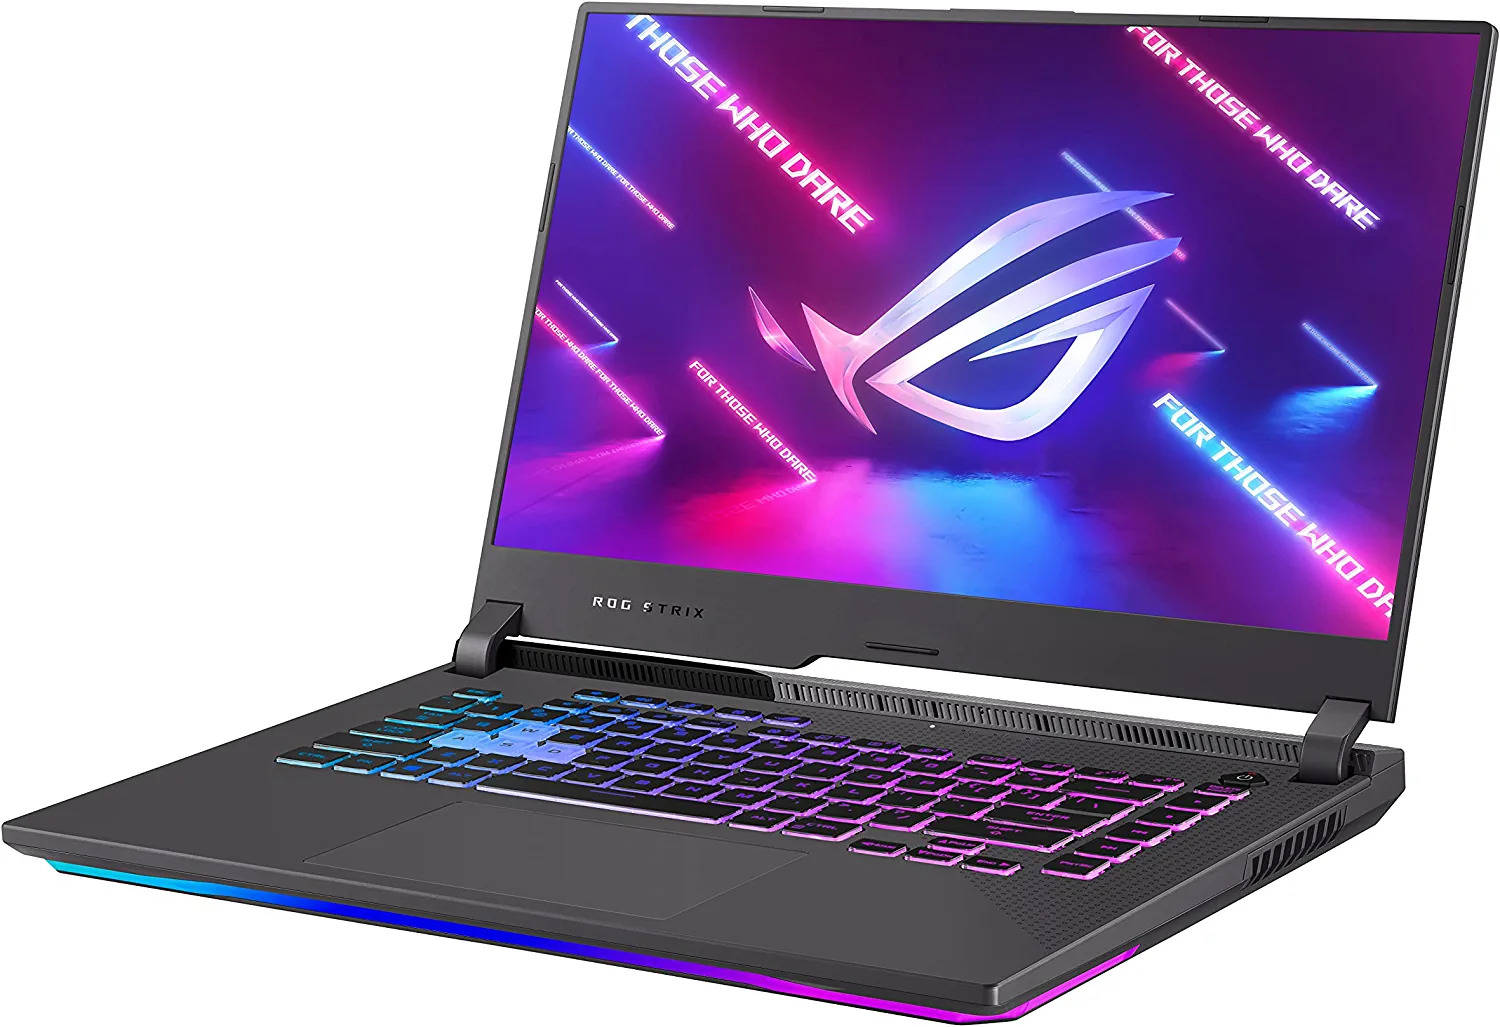 gaming laptops: Best Gaming Laptops $1000 - The Economic Times